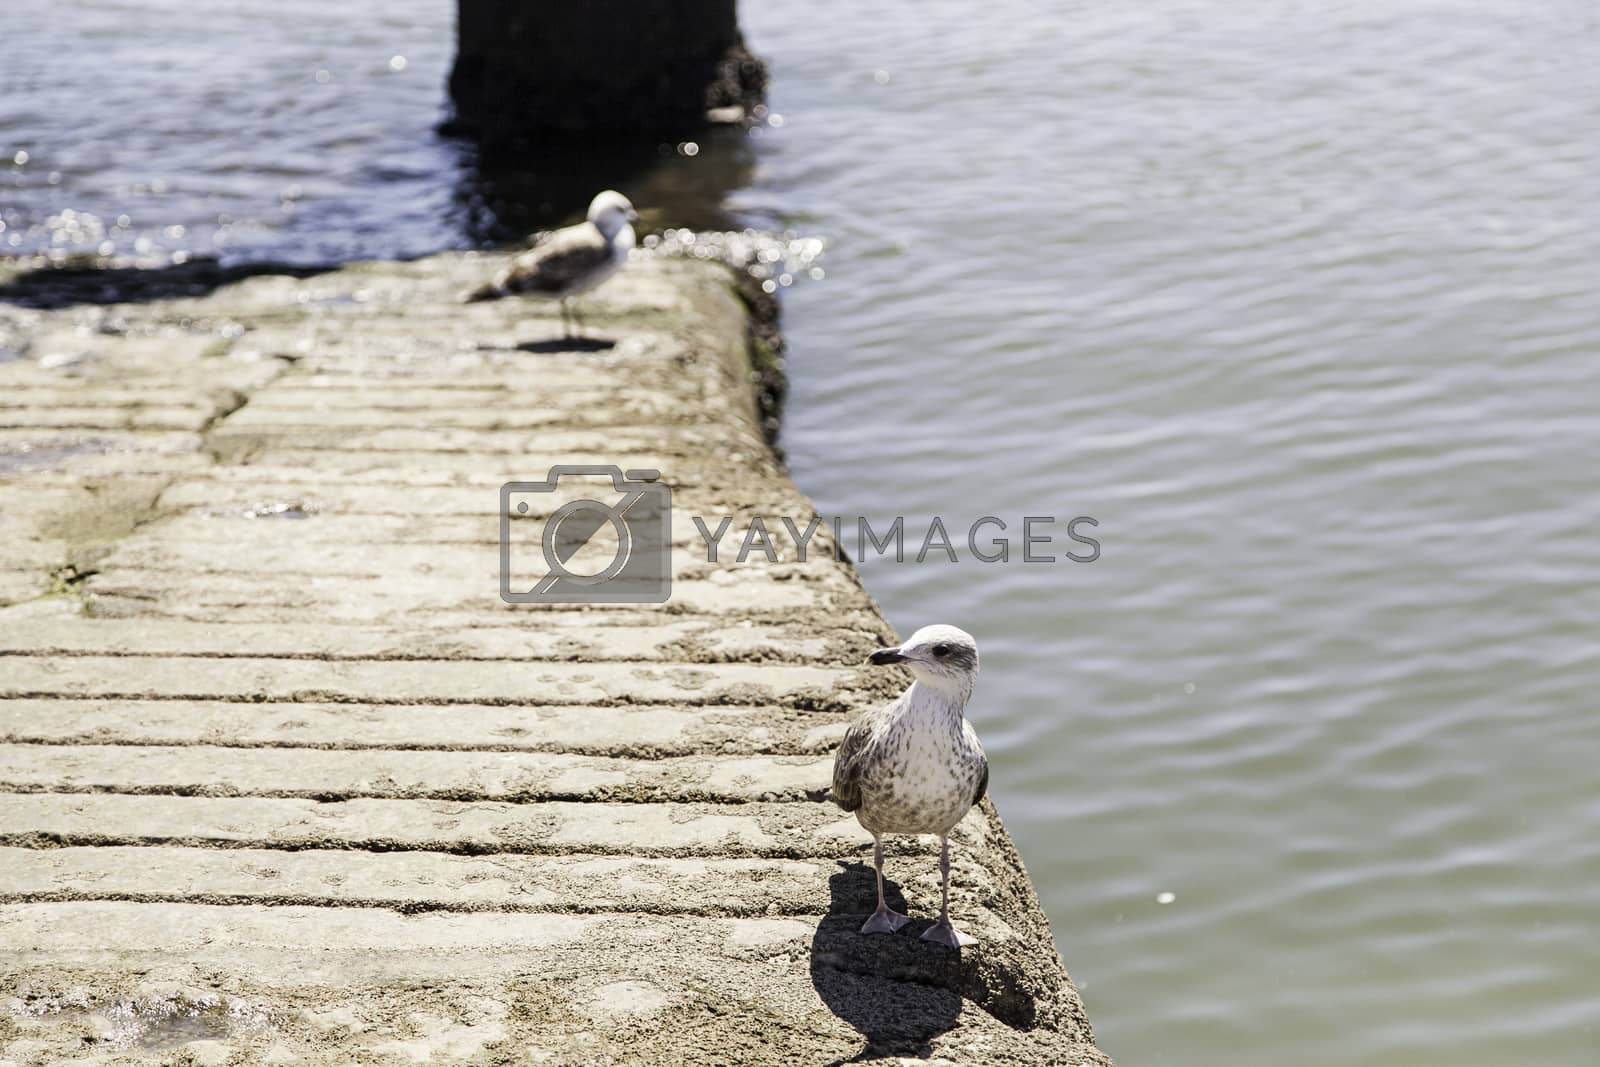 Royalty free image of Seagull on the beach by esebene